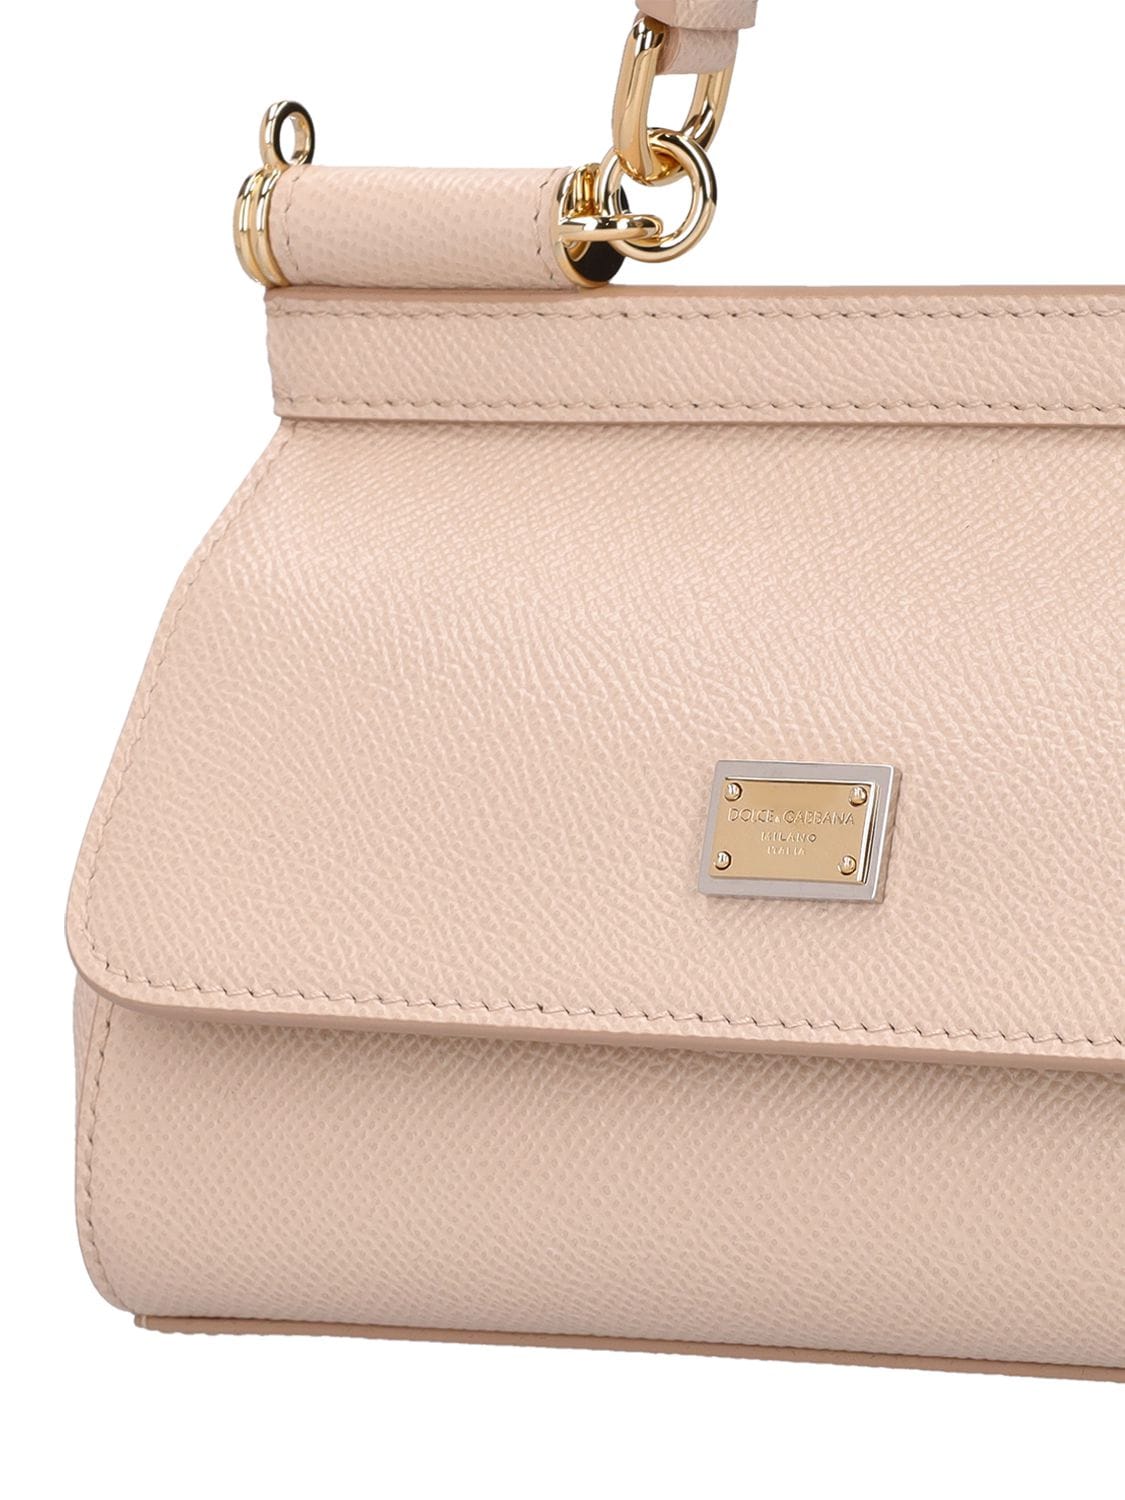 Dolce & Gabbana Small Sicily Bag In Dauphine Leather In Rosa Carne